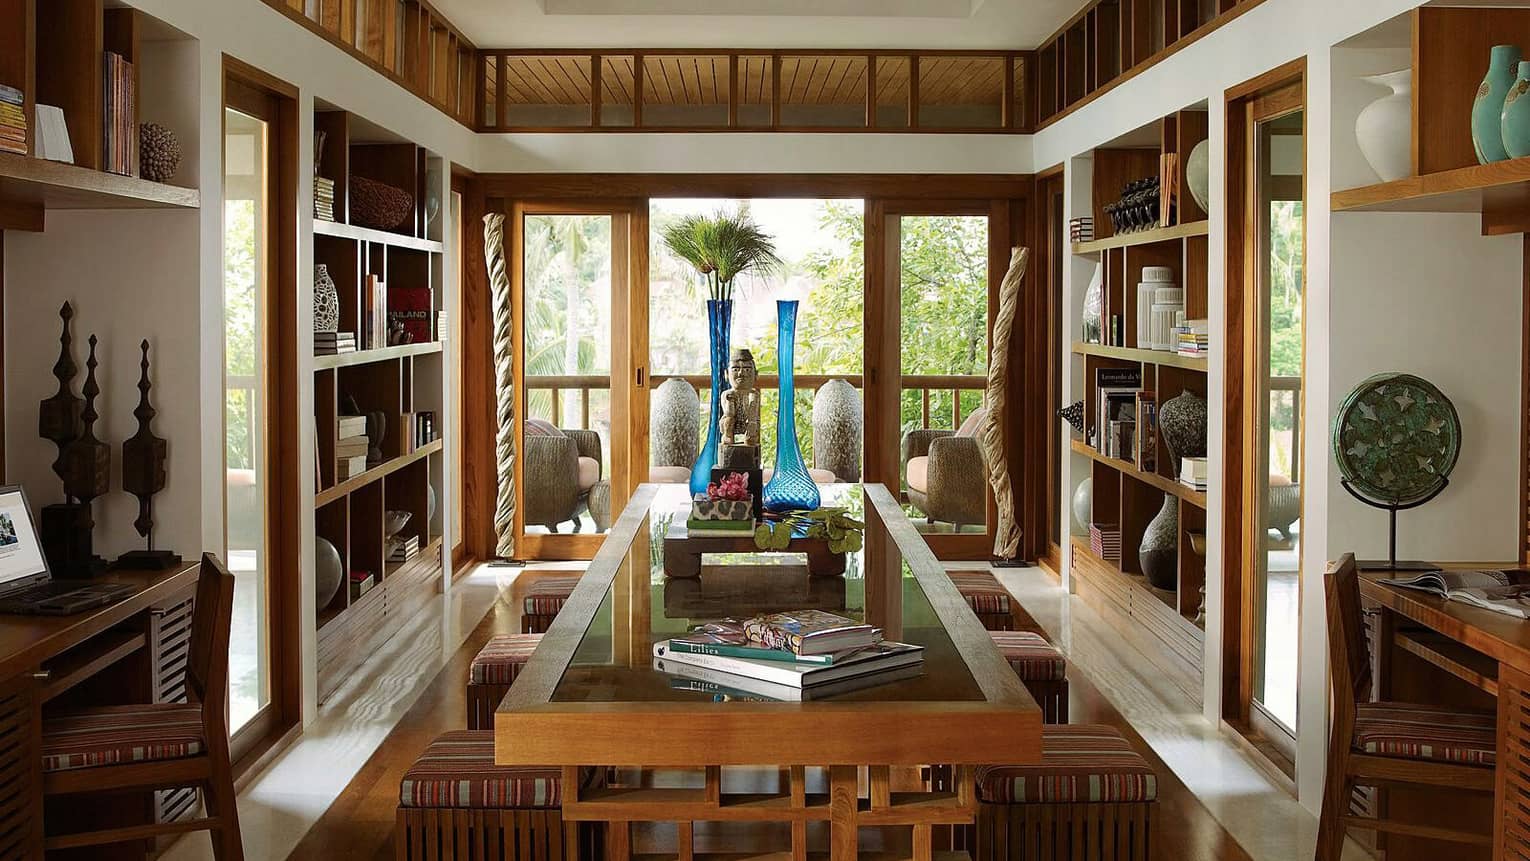 Library with wood shelves, centre table with books, decorative vases